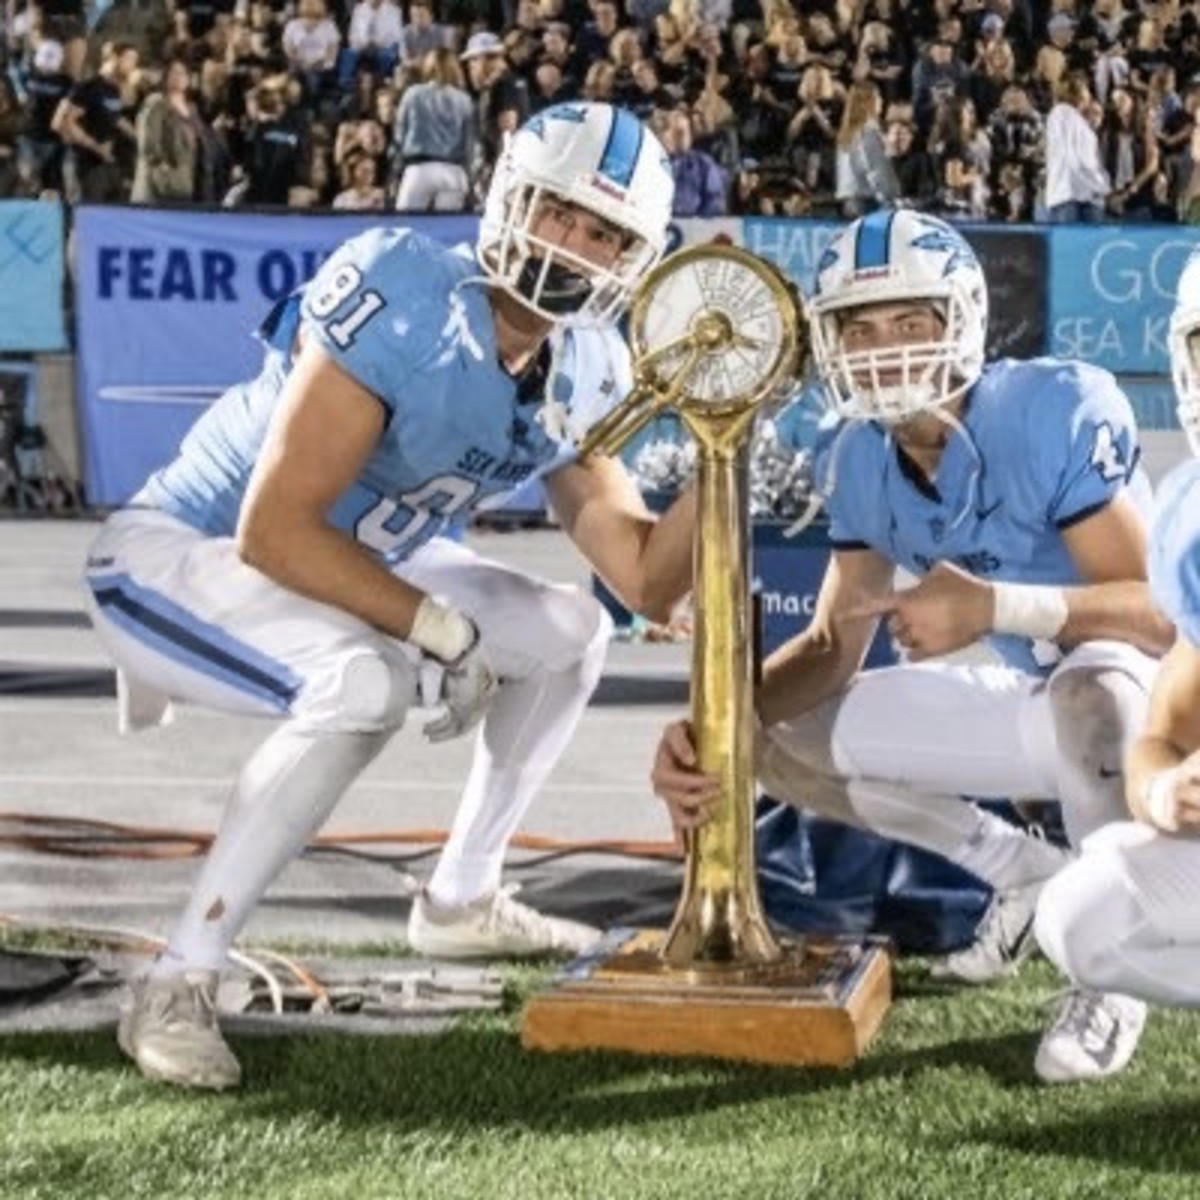 Mark Redman and Ethan Garbers, longtime friends and teammates secure the state title for Corona Del Mar High School. The dynamic duo committed to Washington as a part of the 2020 recruiting class.